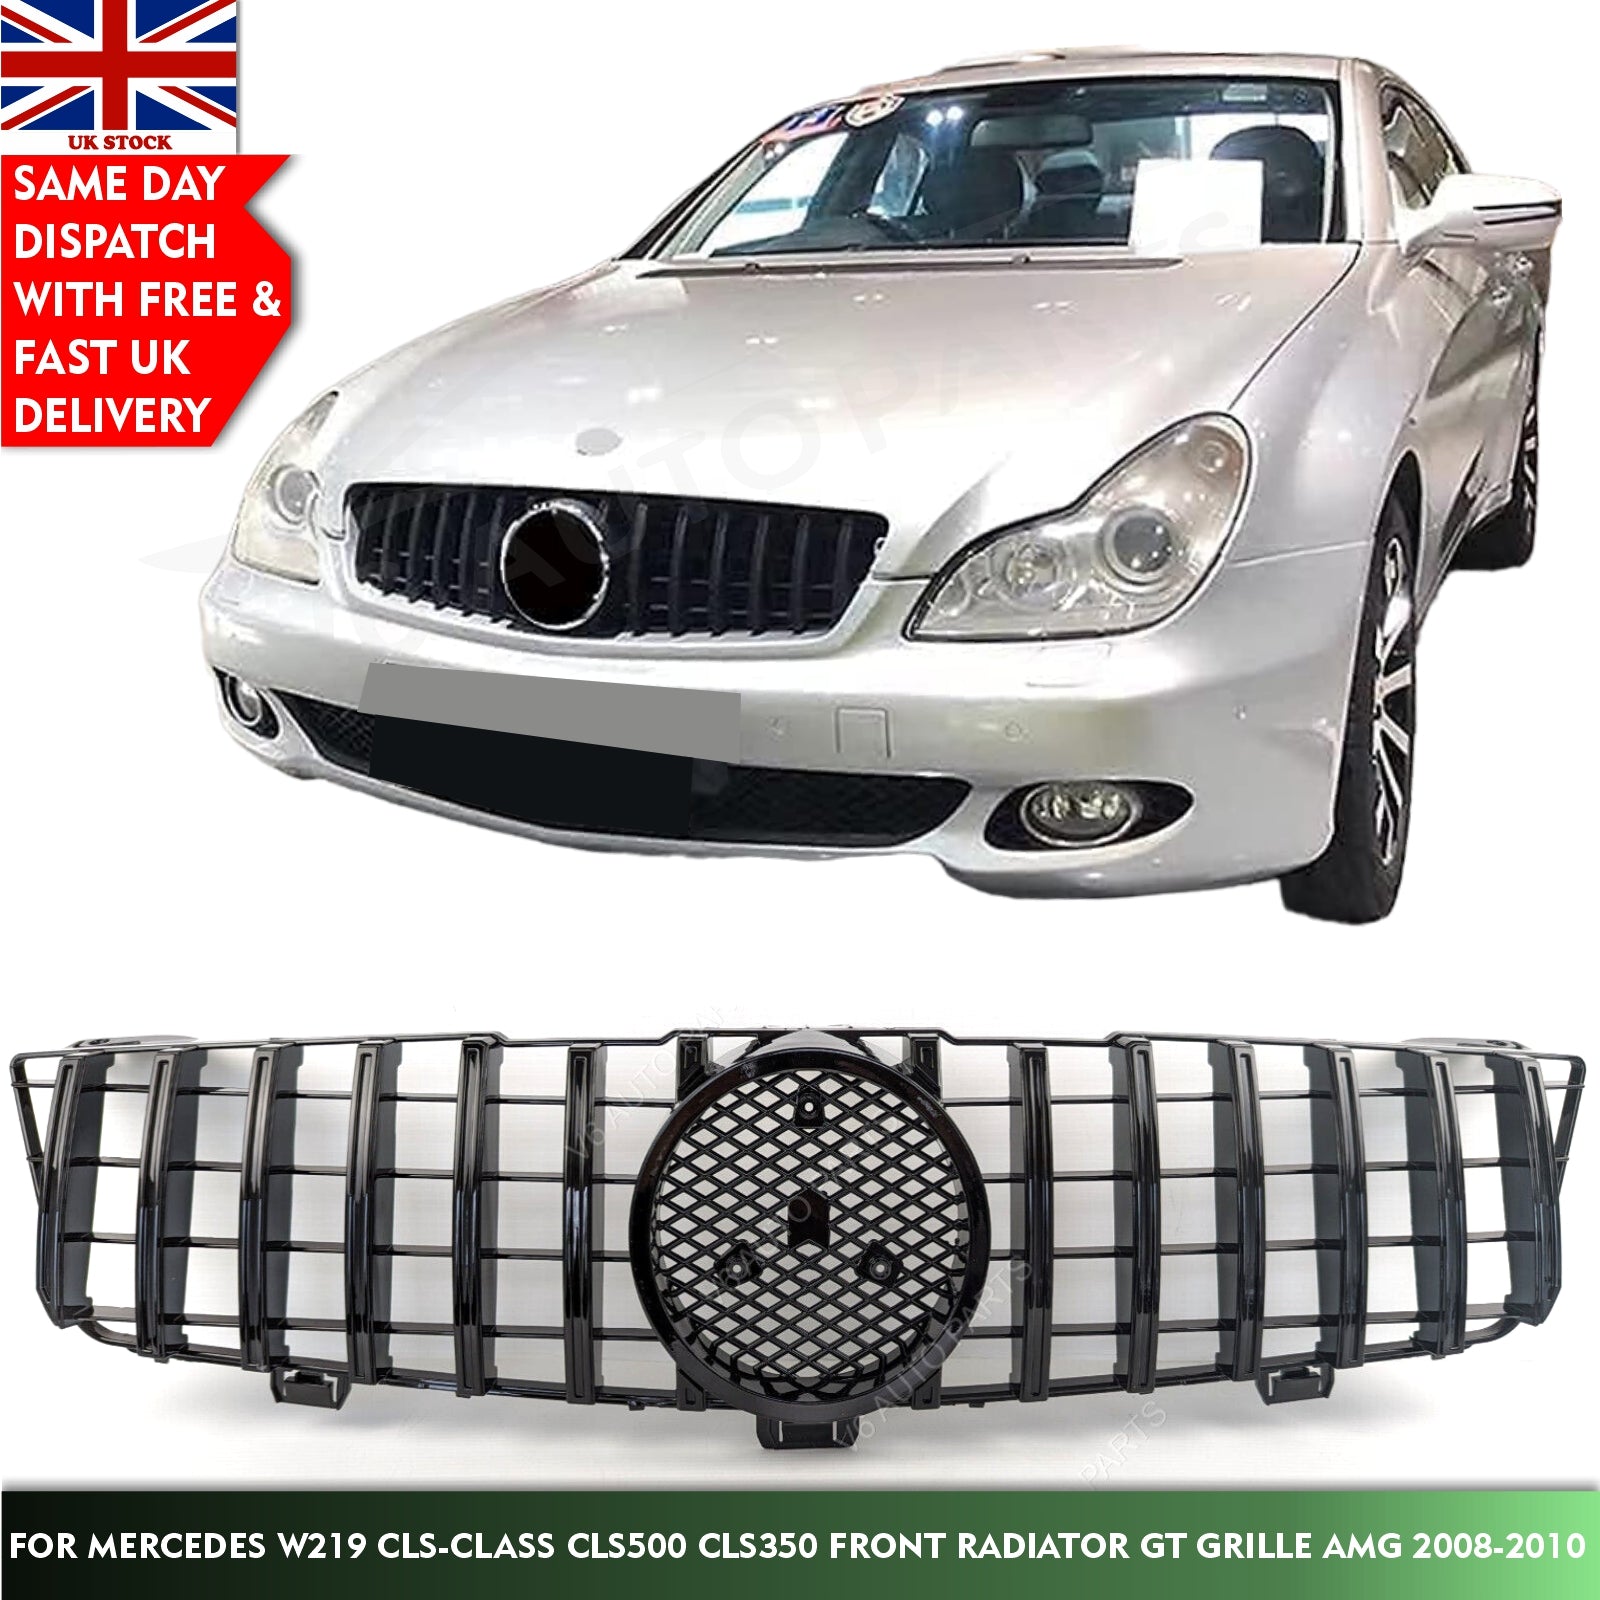 For Mercedes CLS-Class C219 CLS350 500 AMG CLS55 Front Bumper Black Grille 08-10